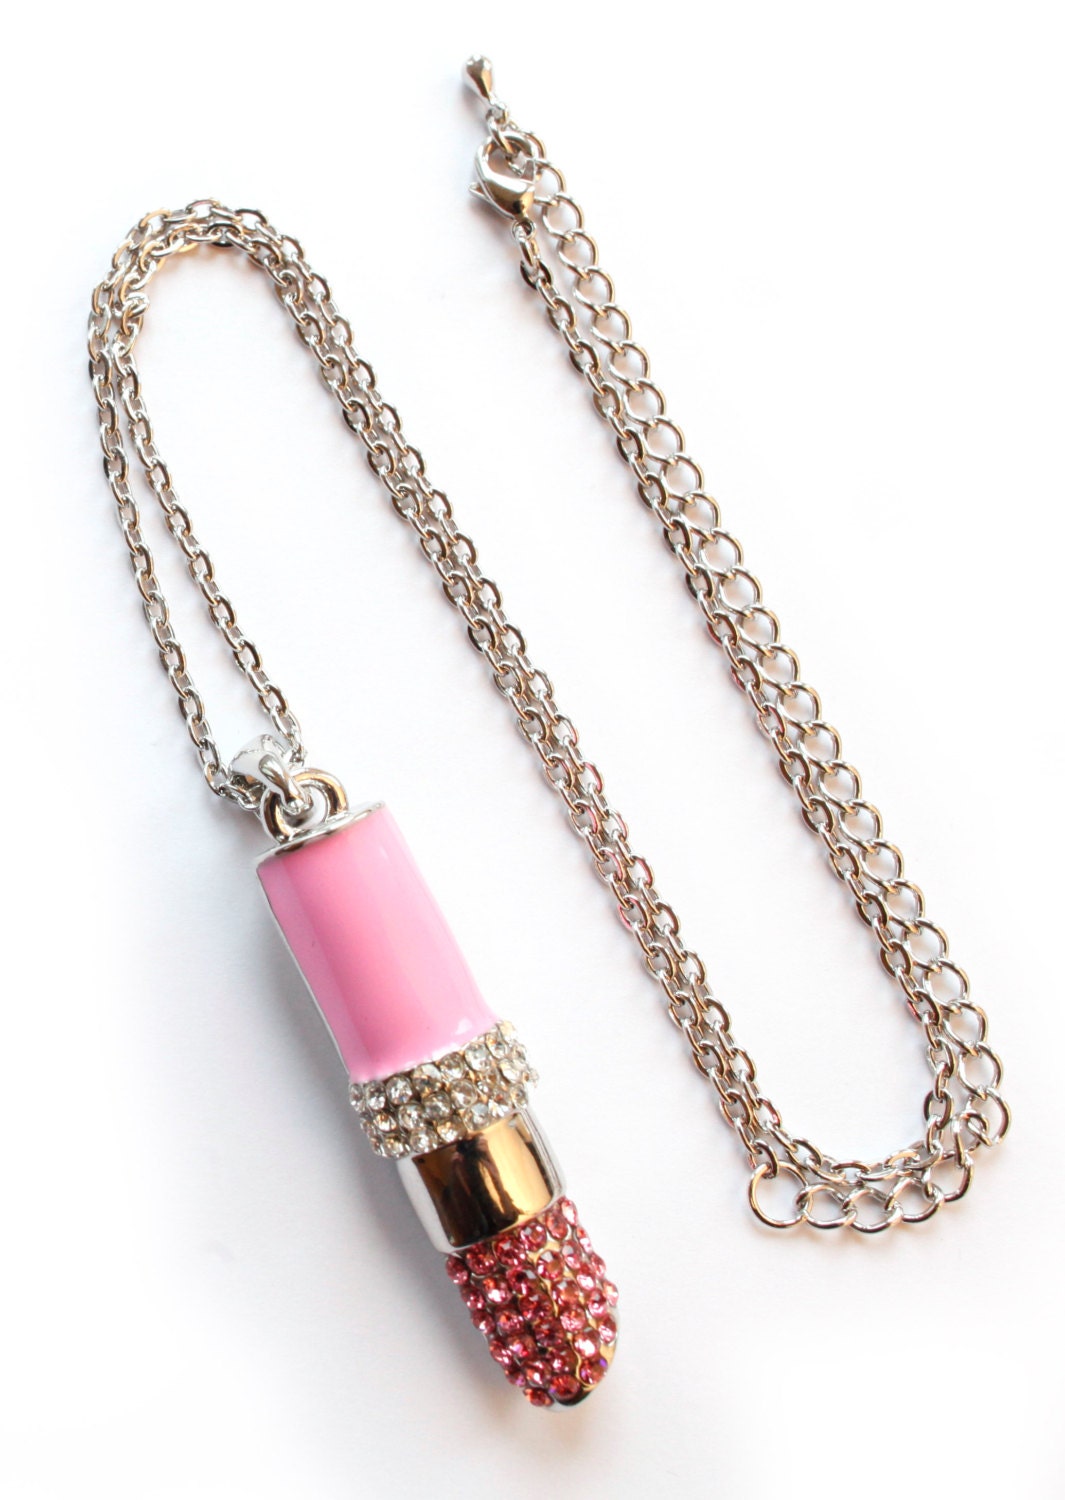 Pink lipstick necklace by Double Dice - DoubleDice